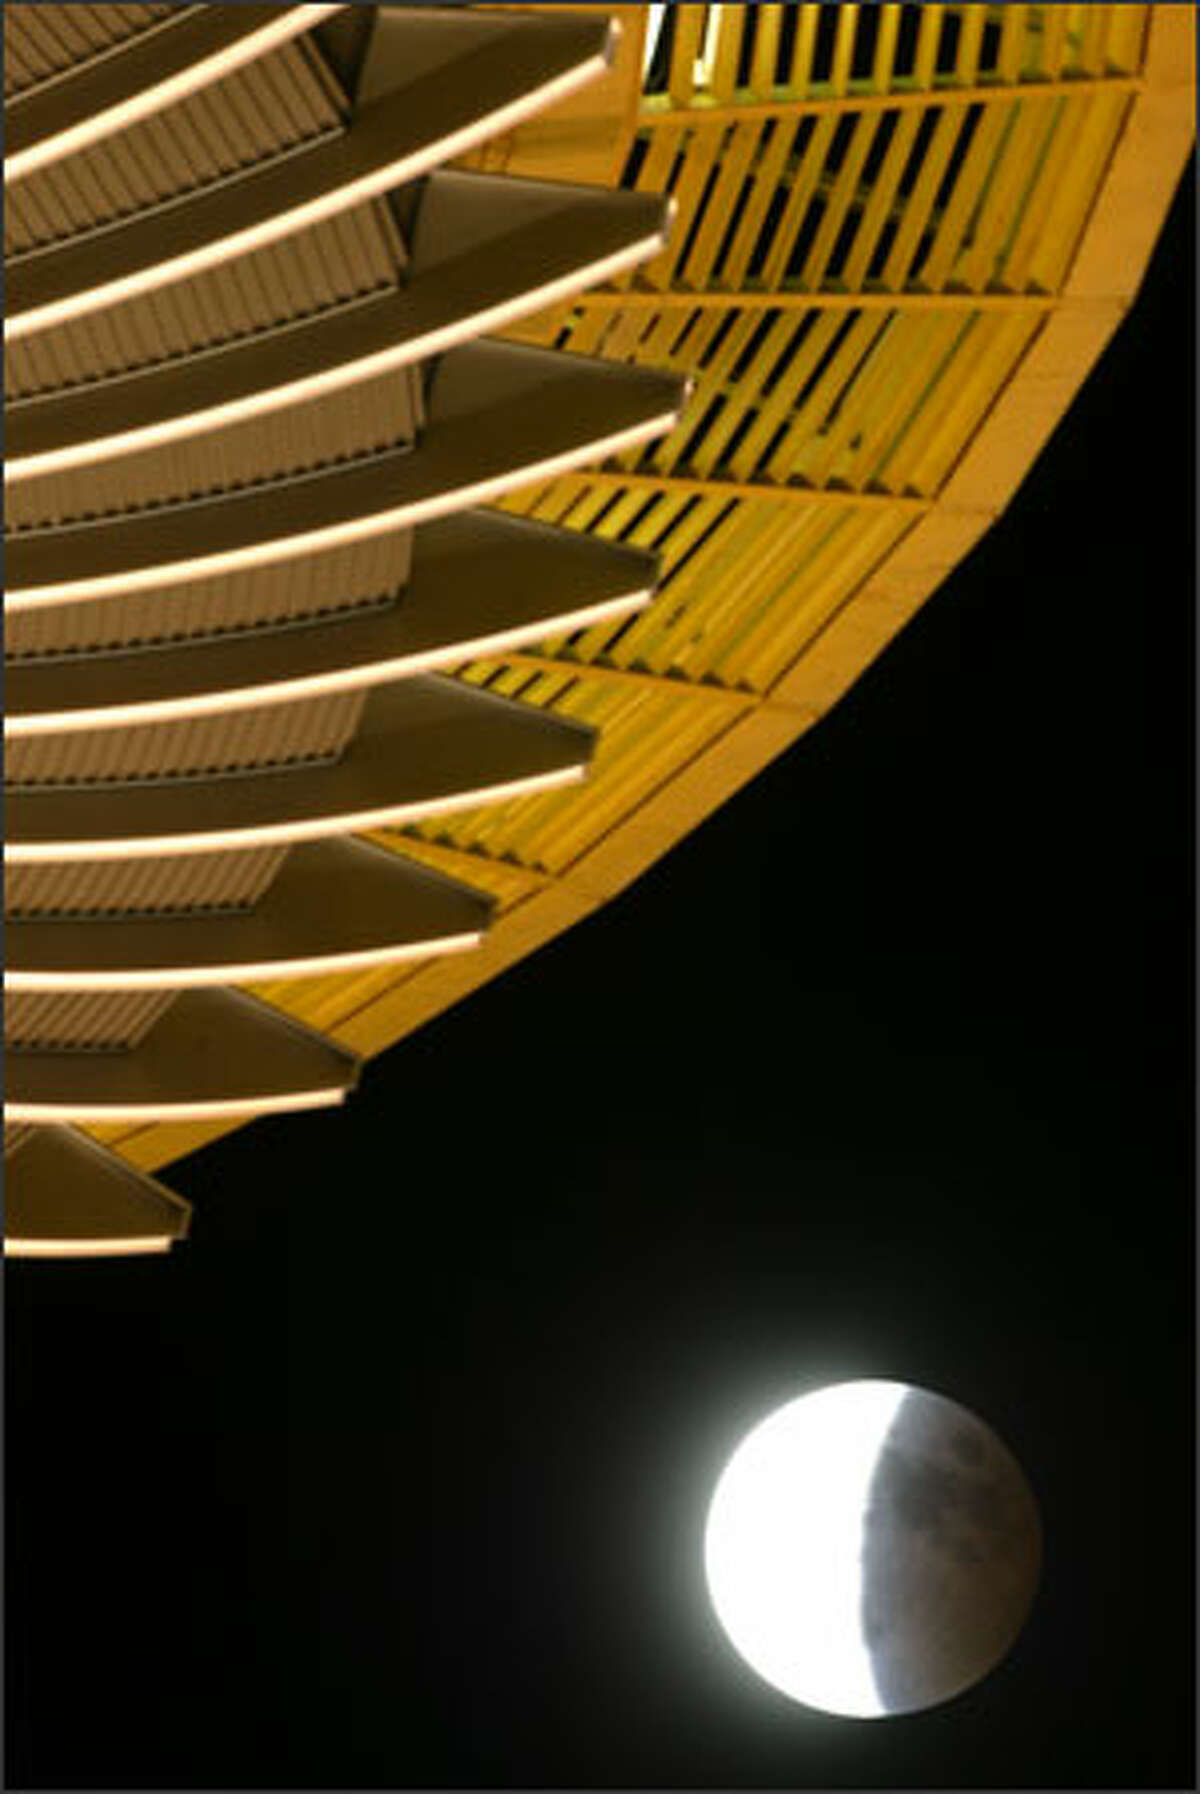 The moon emerges from the earth's shadow as it moves southeast through the Seattle sky during Wednesday's lunar eclipse, as viewed from beneath the Space Needle.